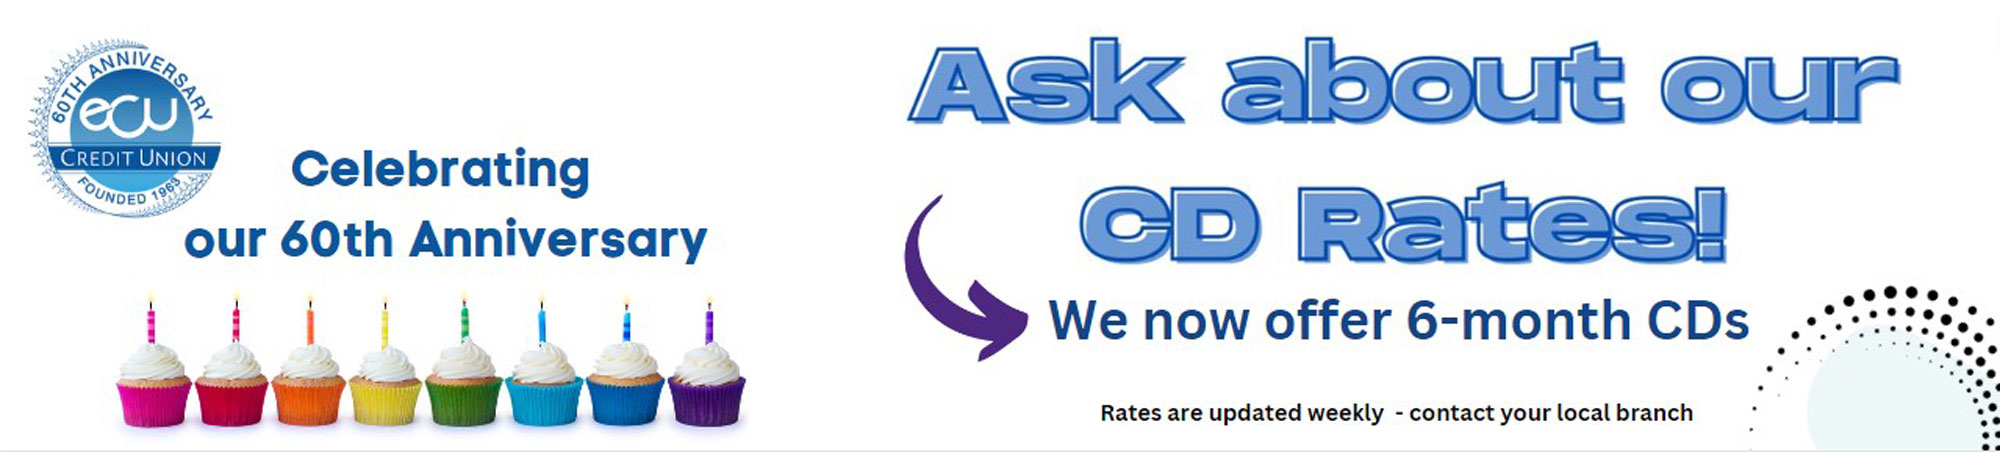 Ask about our cd rates